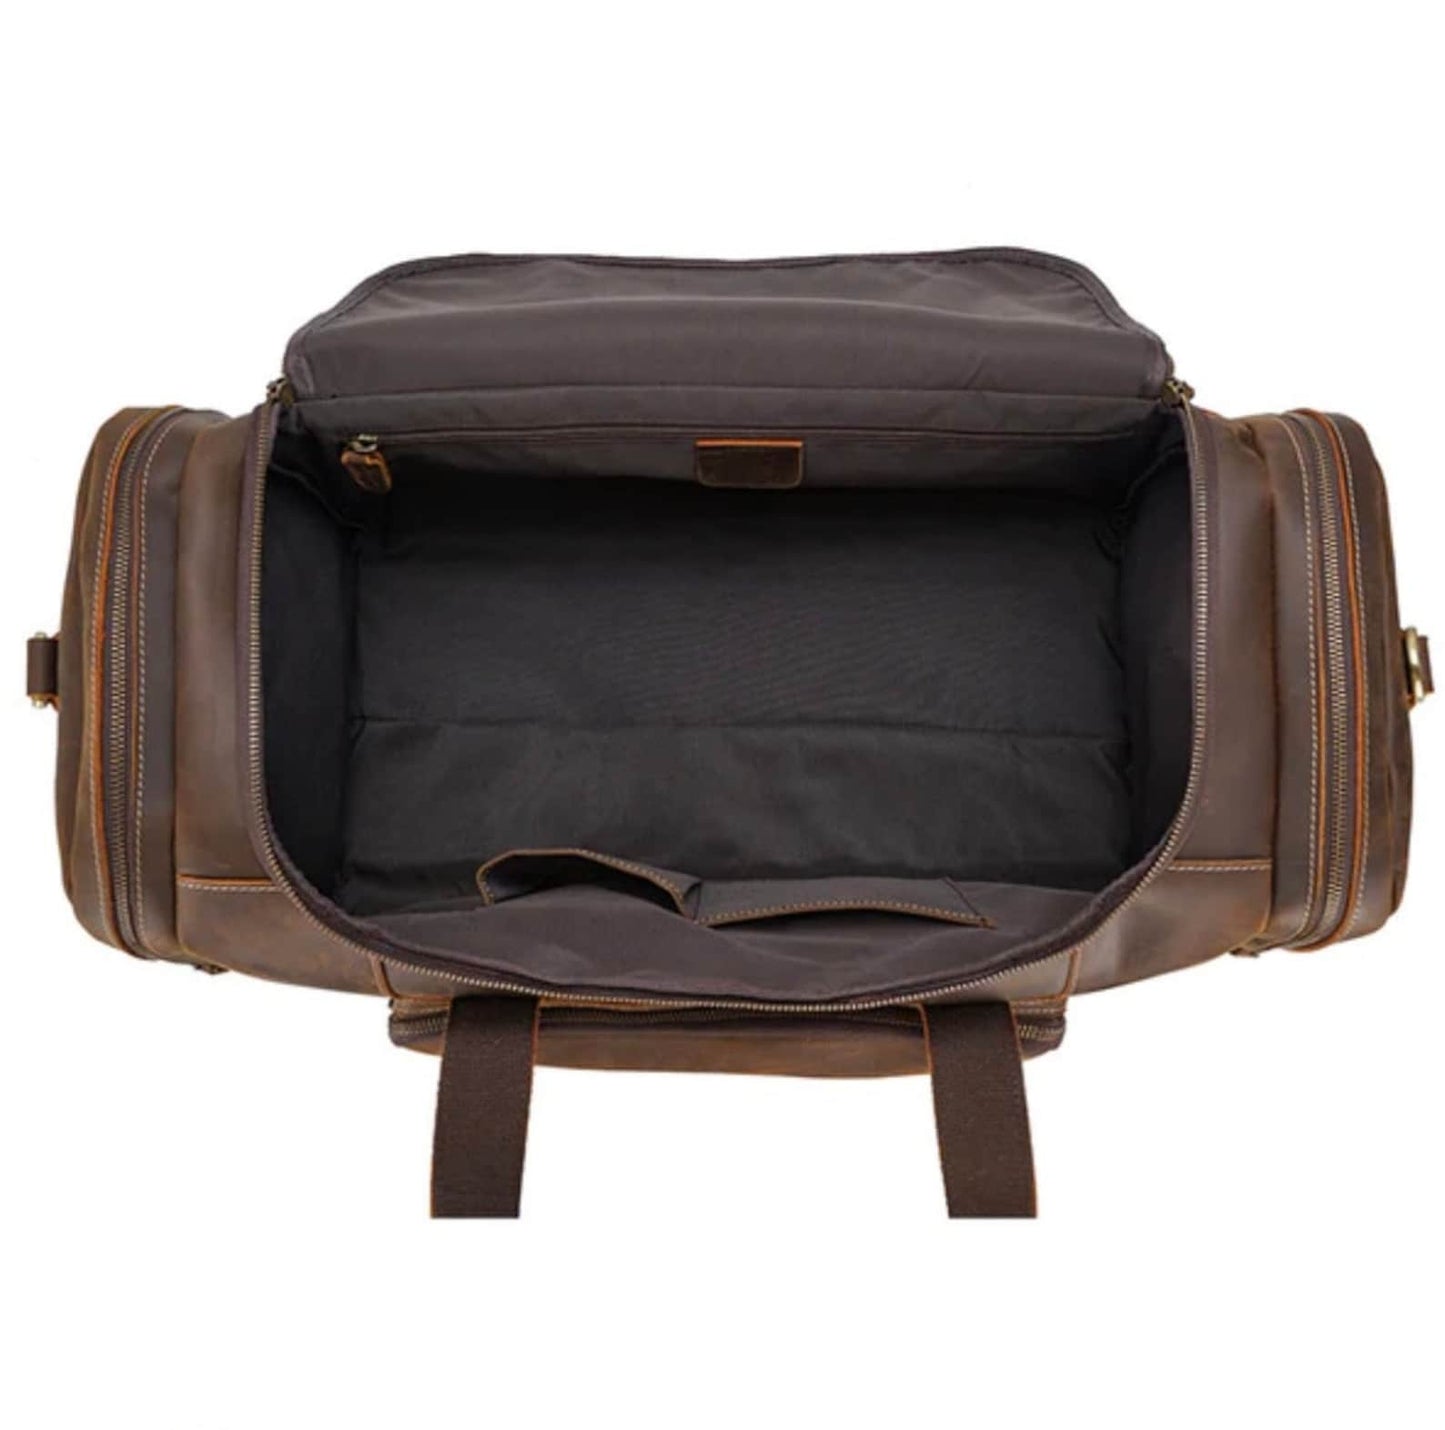 Real Genuine Leather Overnight Duffle Bag